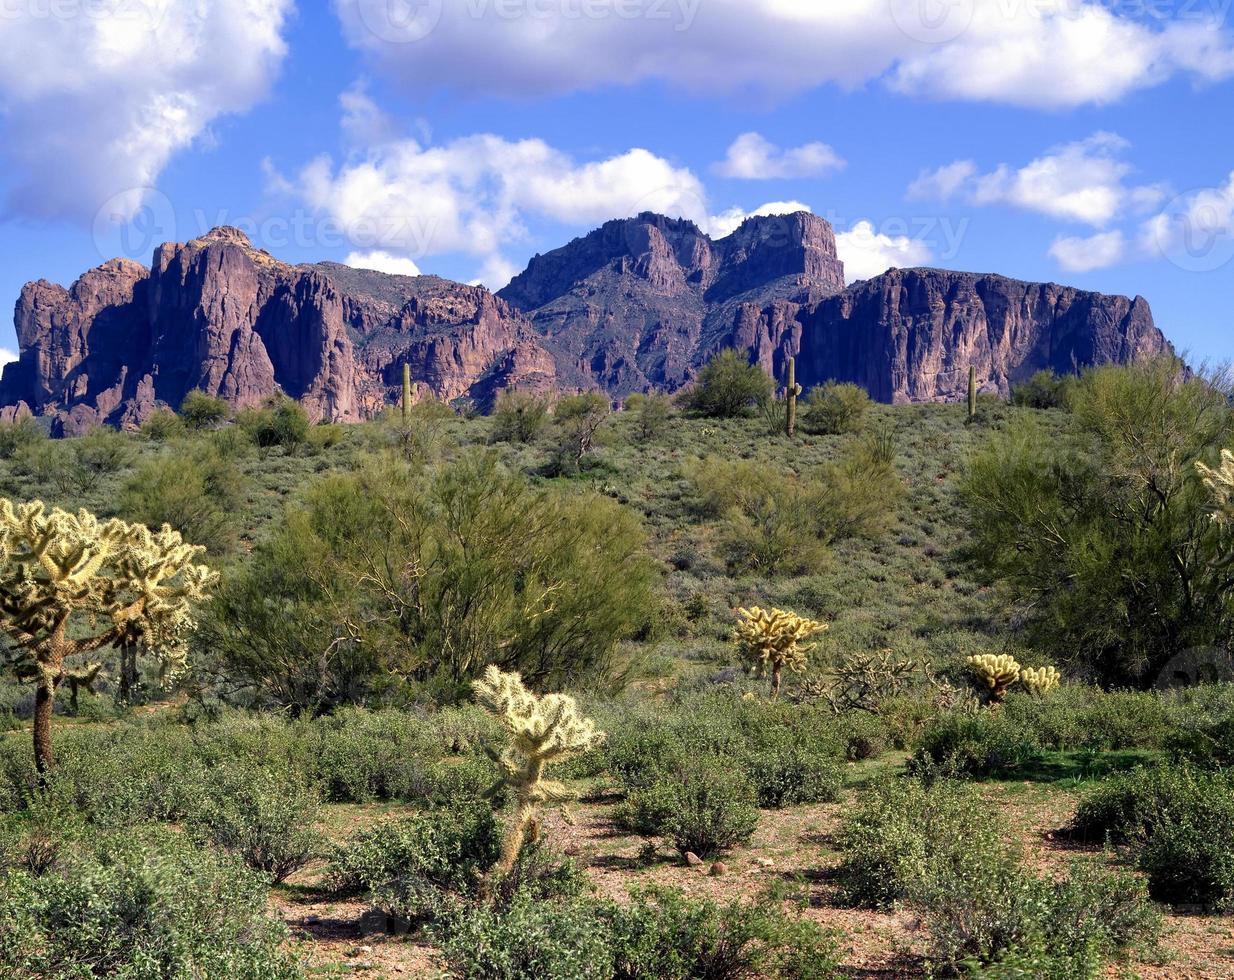 The Superstition Mountains photo